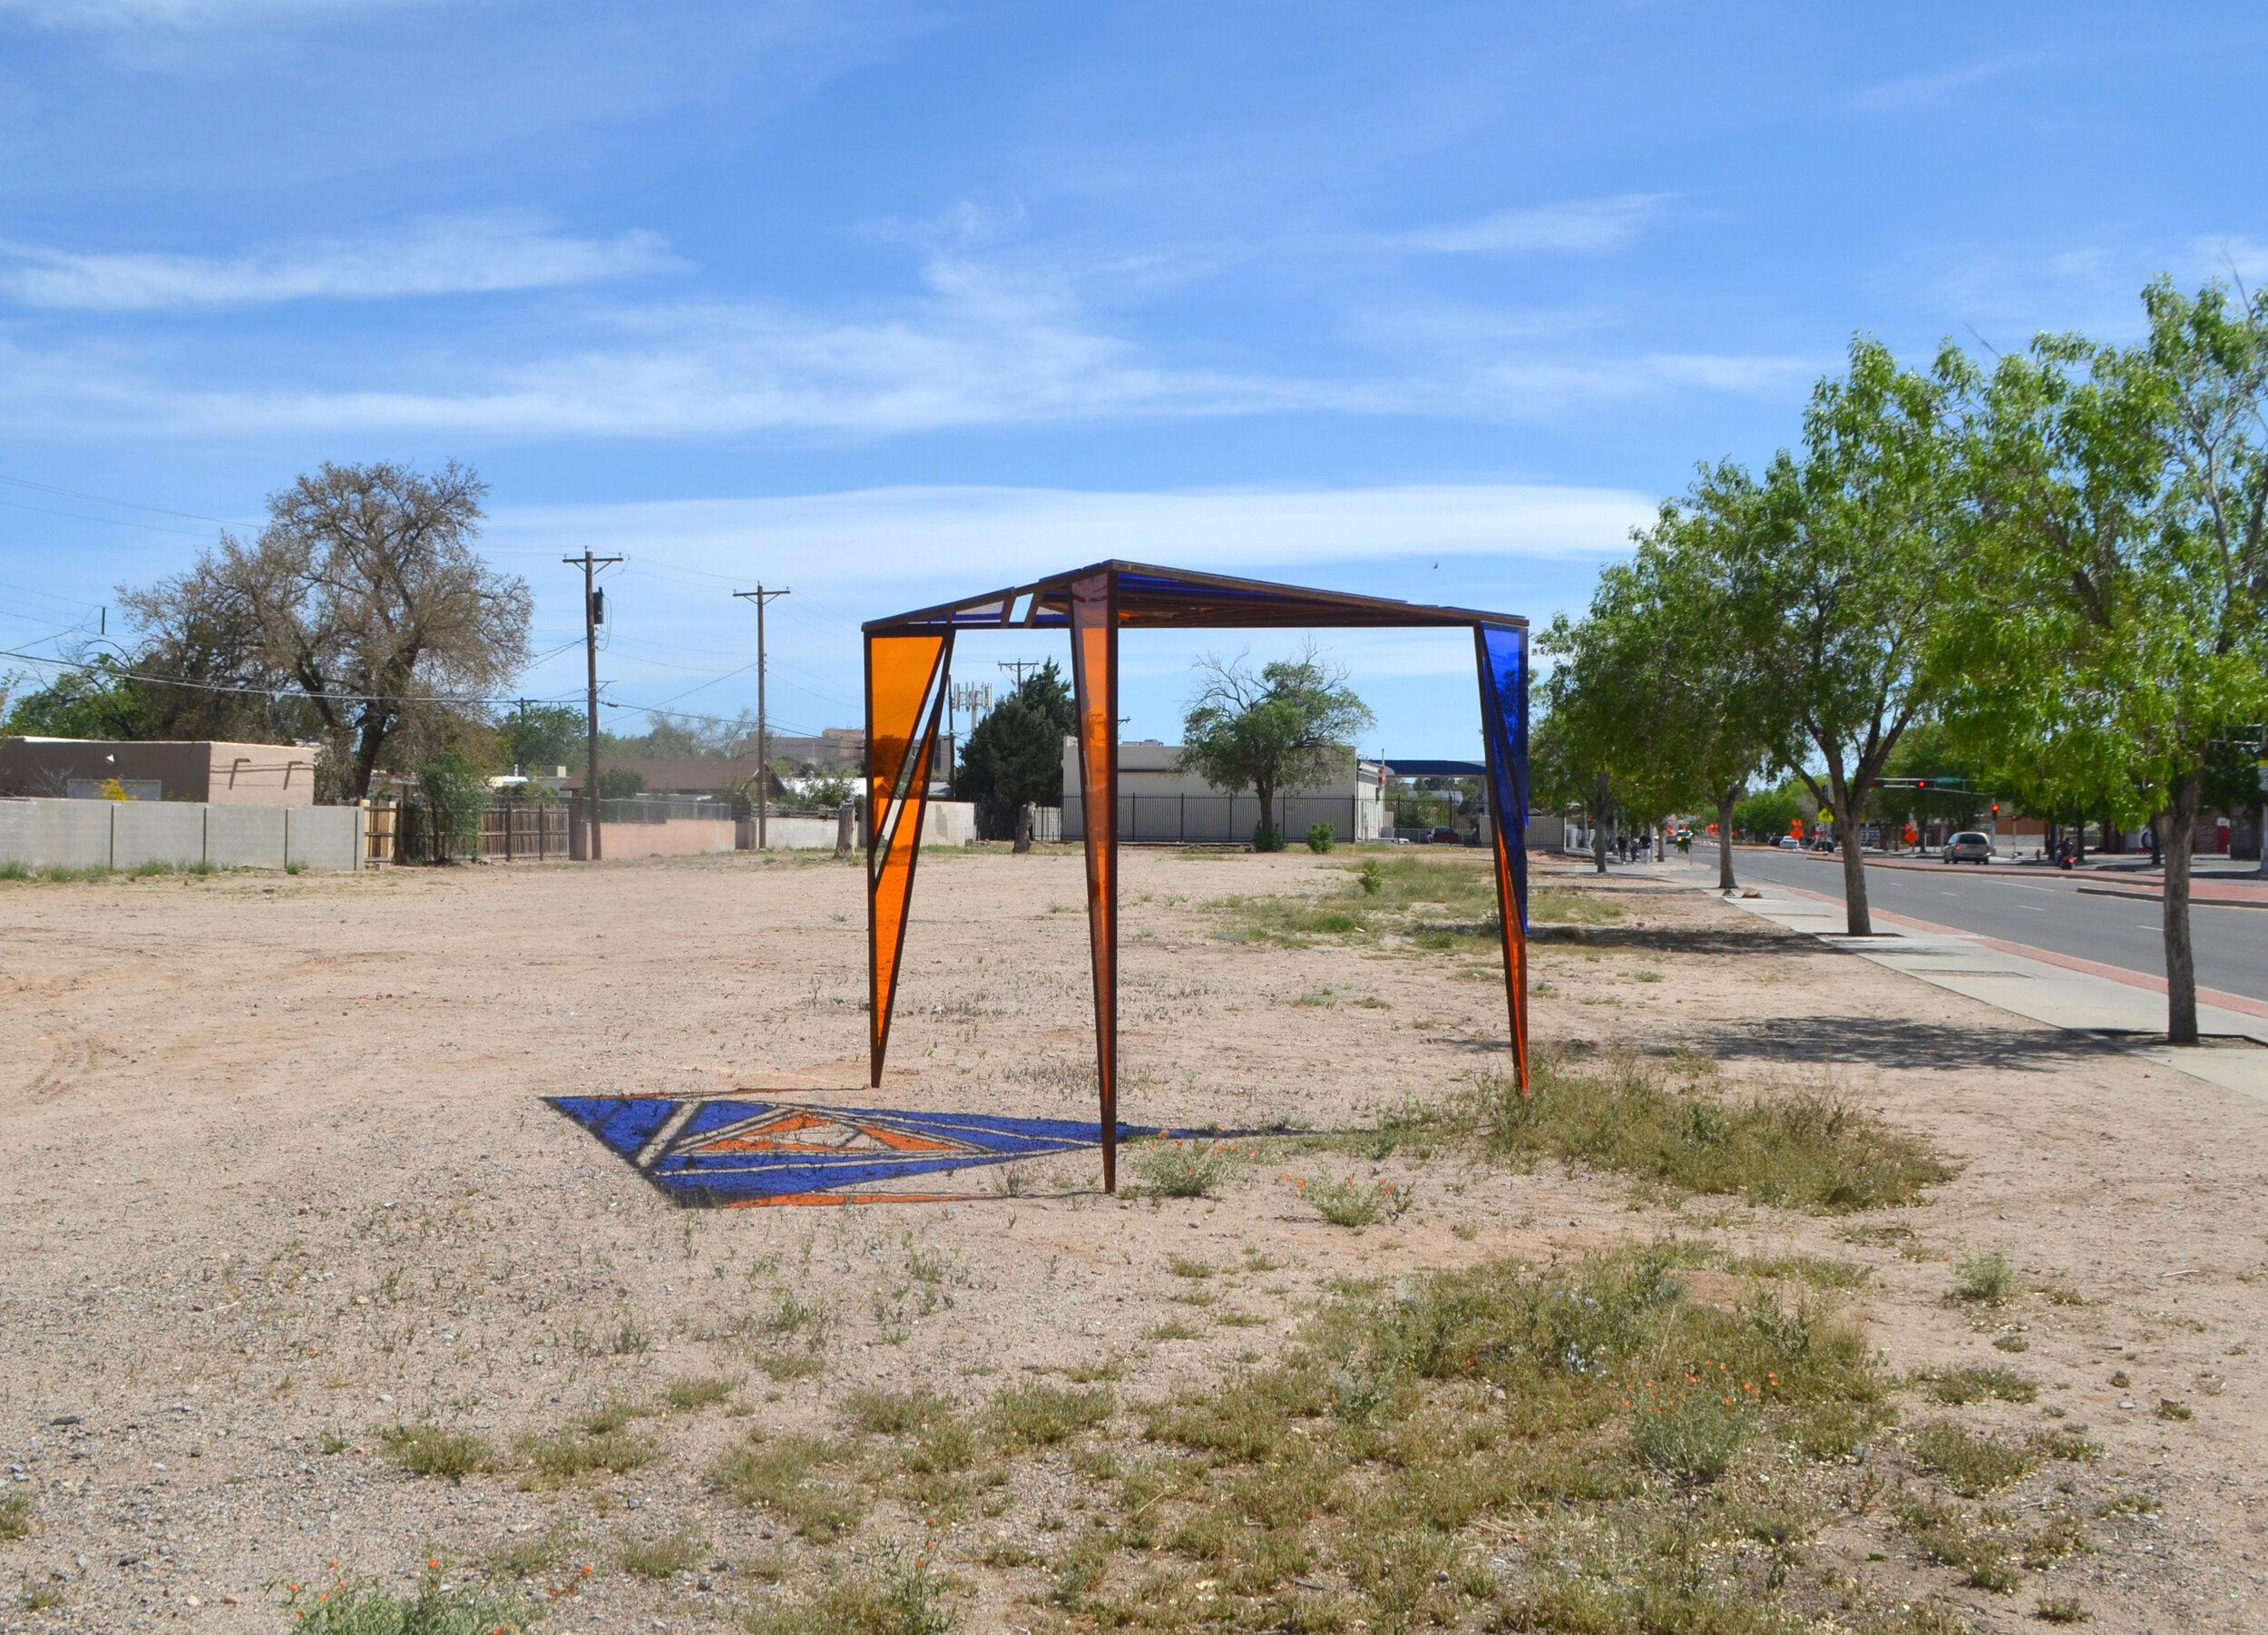  BJM worked with Artful Life, Rocky Mountain Youth Core and The Nature Conservancy to create a pop up park in Albuquerque’s International District. This South San Mateo Park is mobile and a model for more creative green spaces in the ID. The modular 